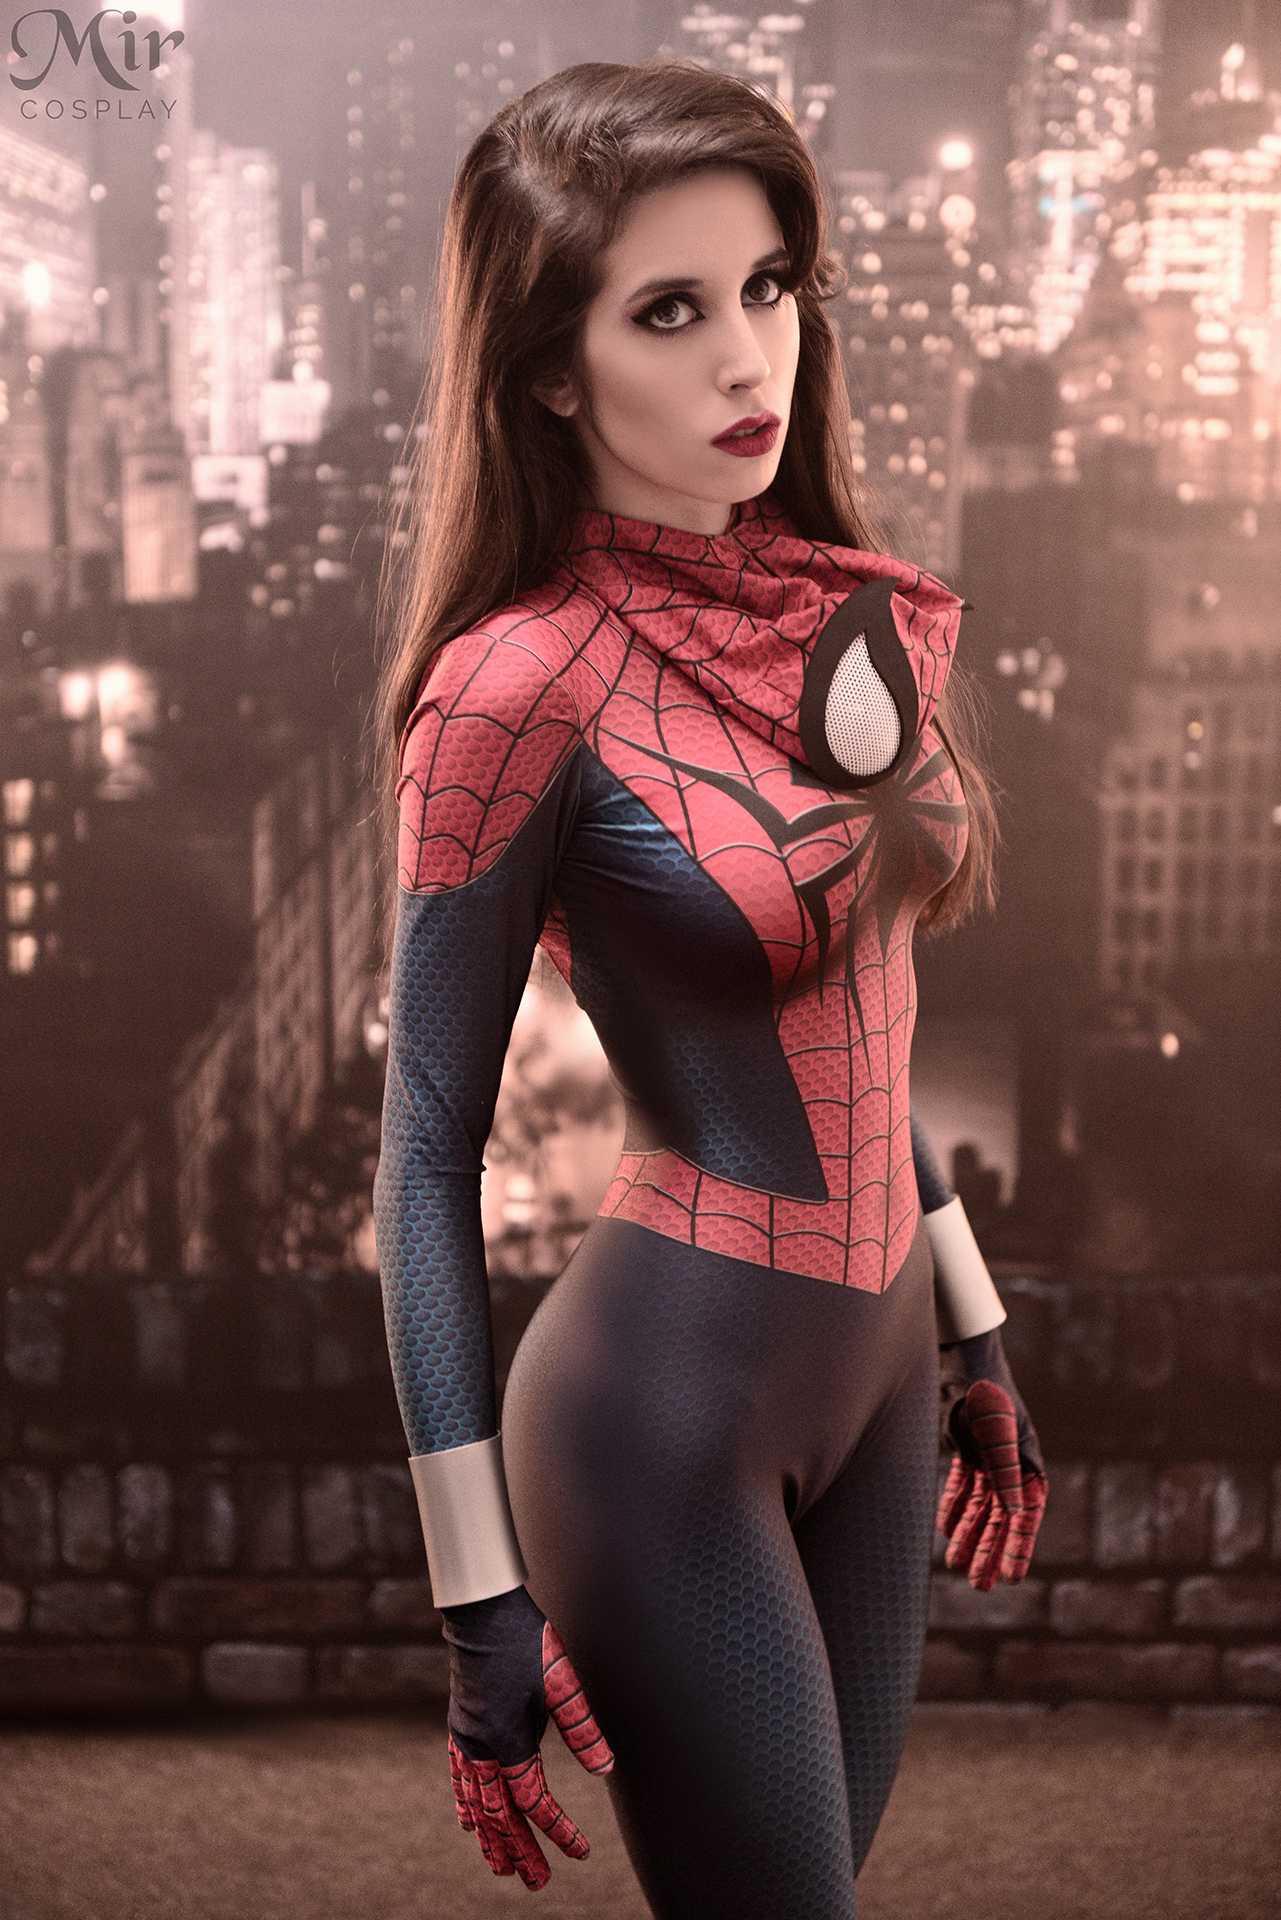 51 Hot Pictures Of Spider-Girl Are Windows Into Paradise 16